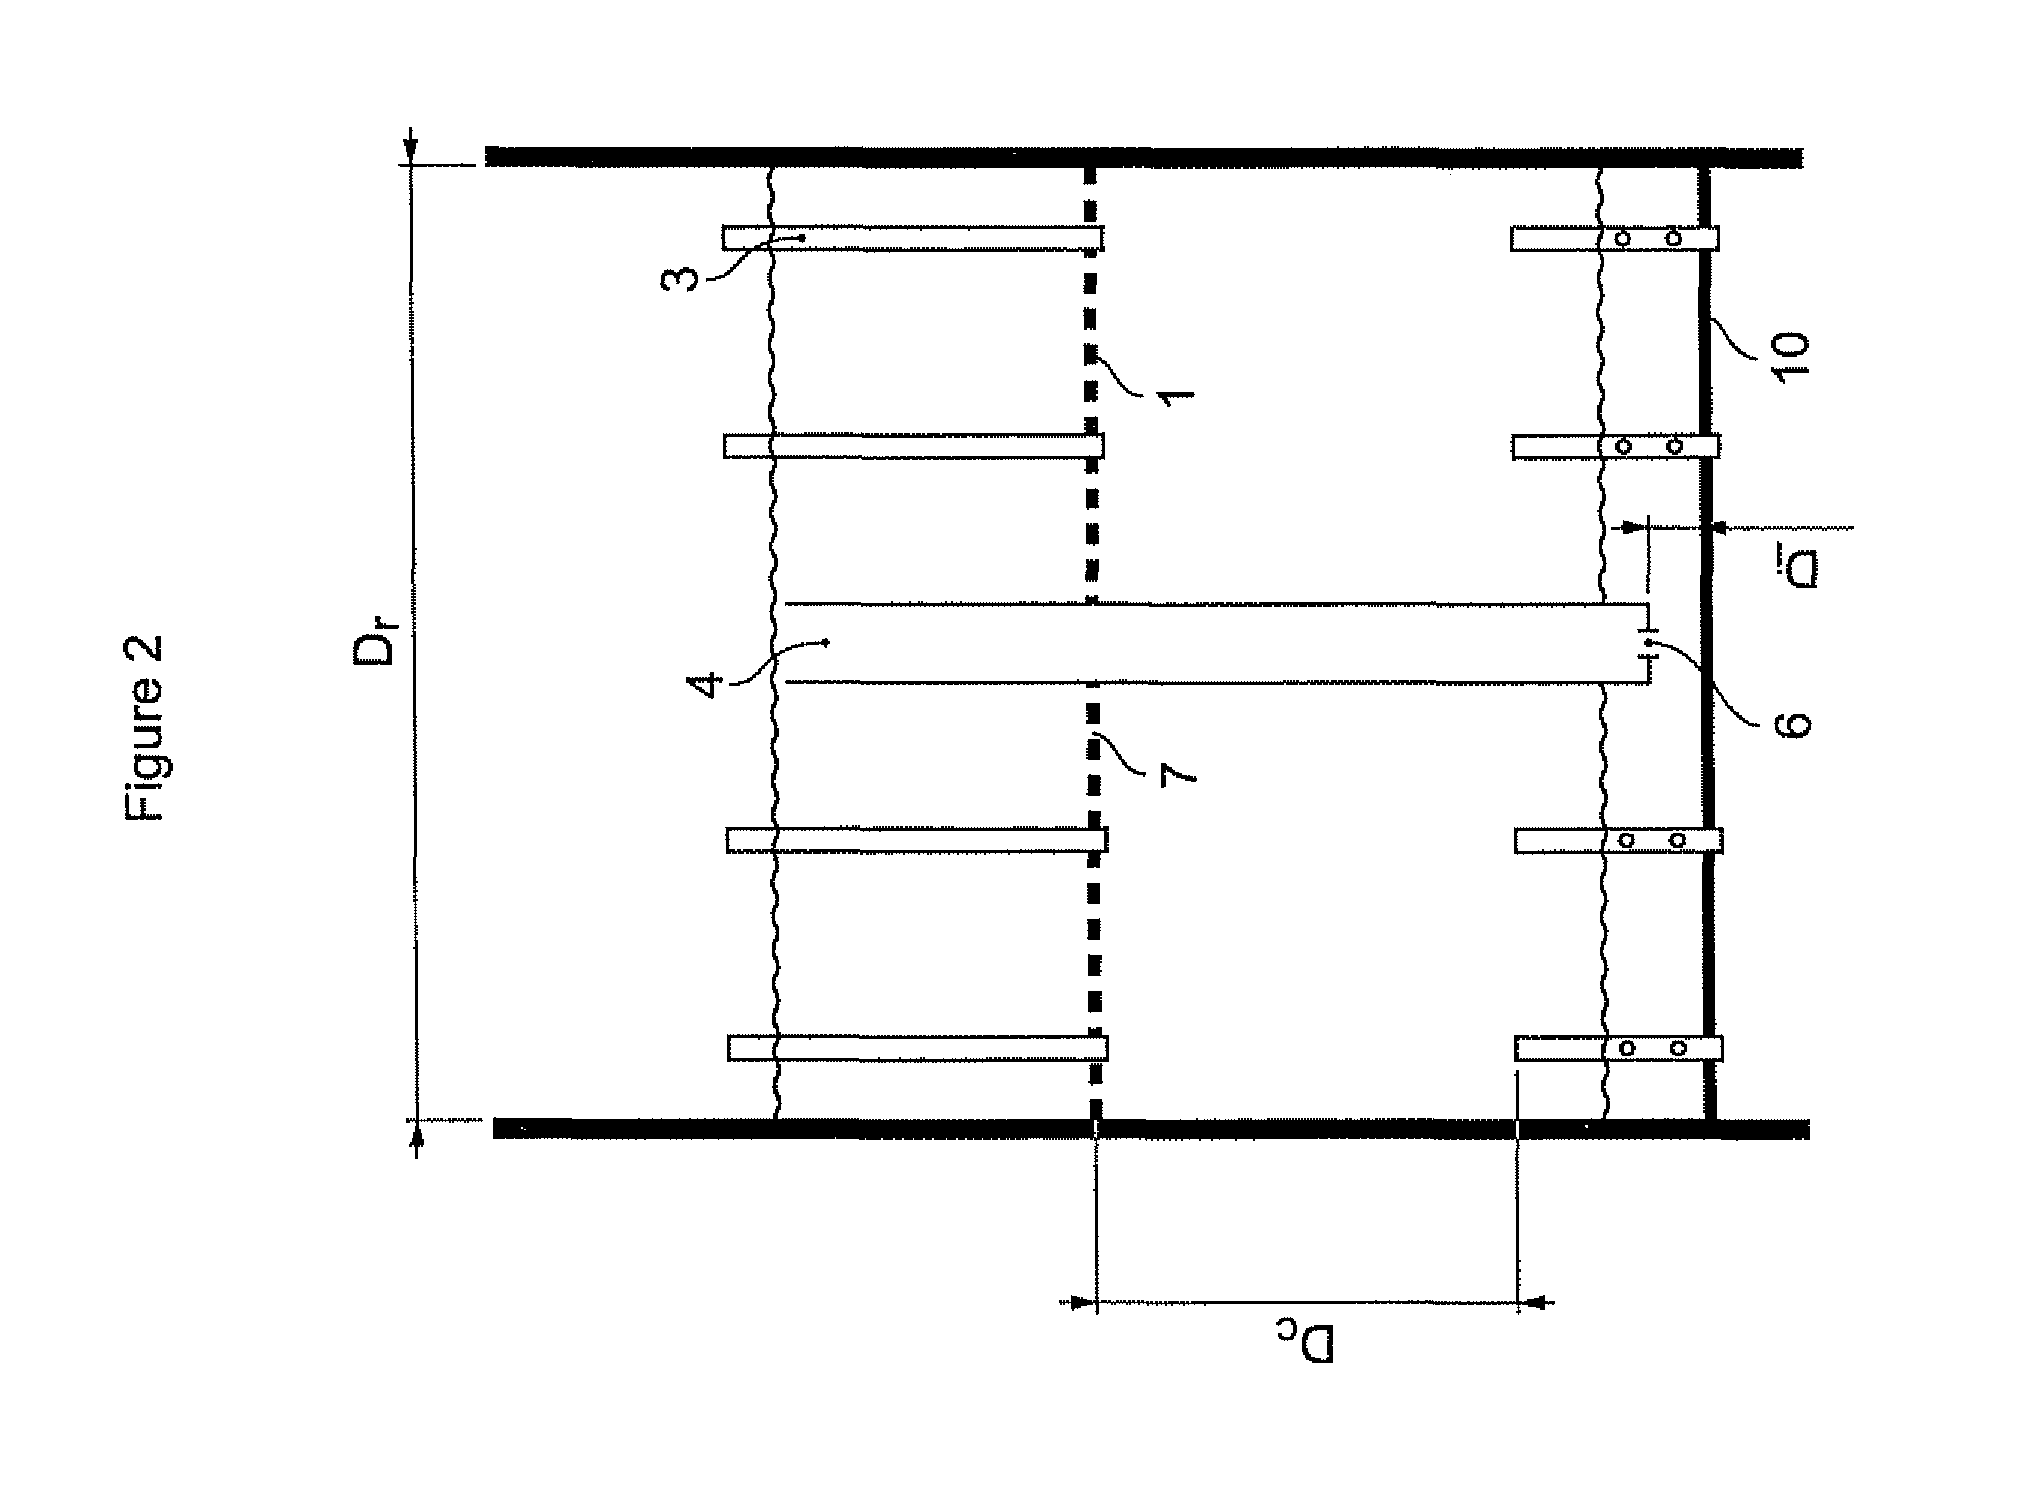 Process and apparatus for filtration and pre-distribution of gas and liquid phases in a down-flow catalytic reactor